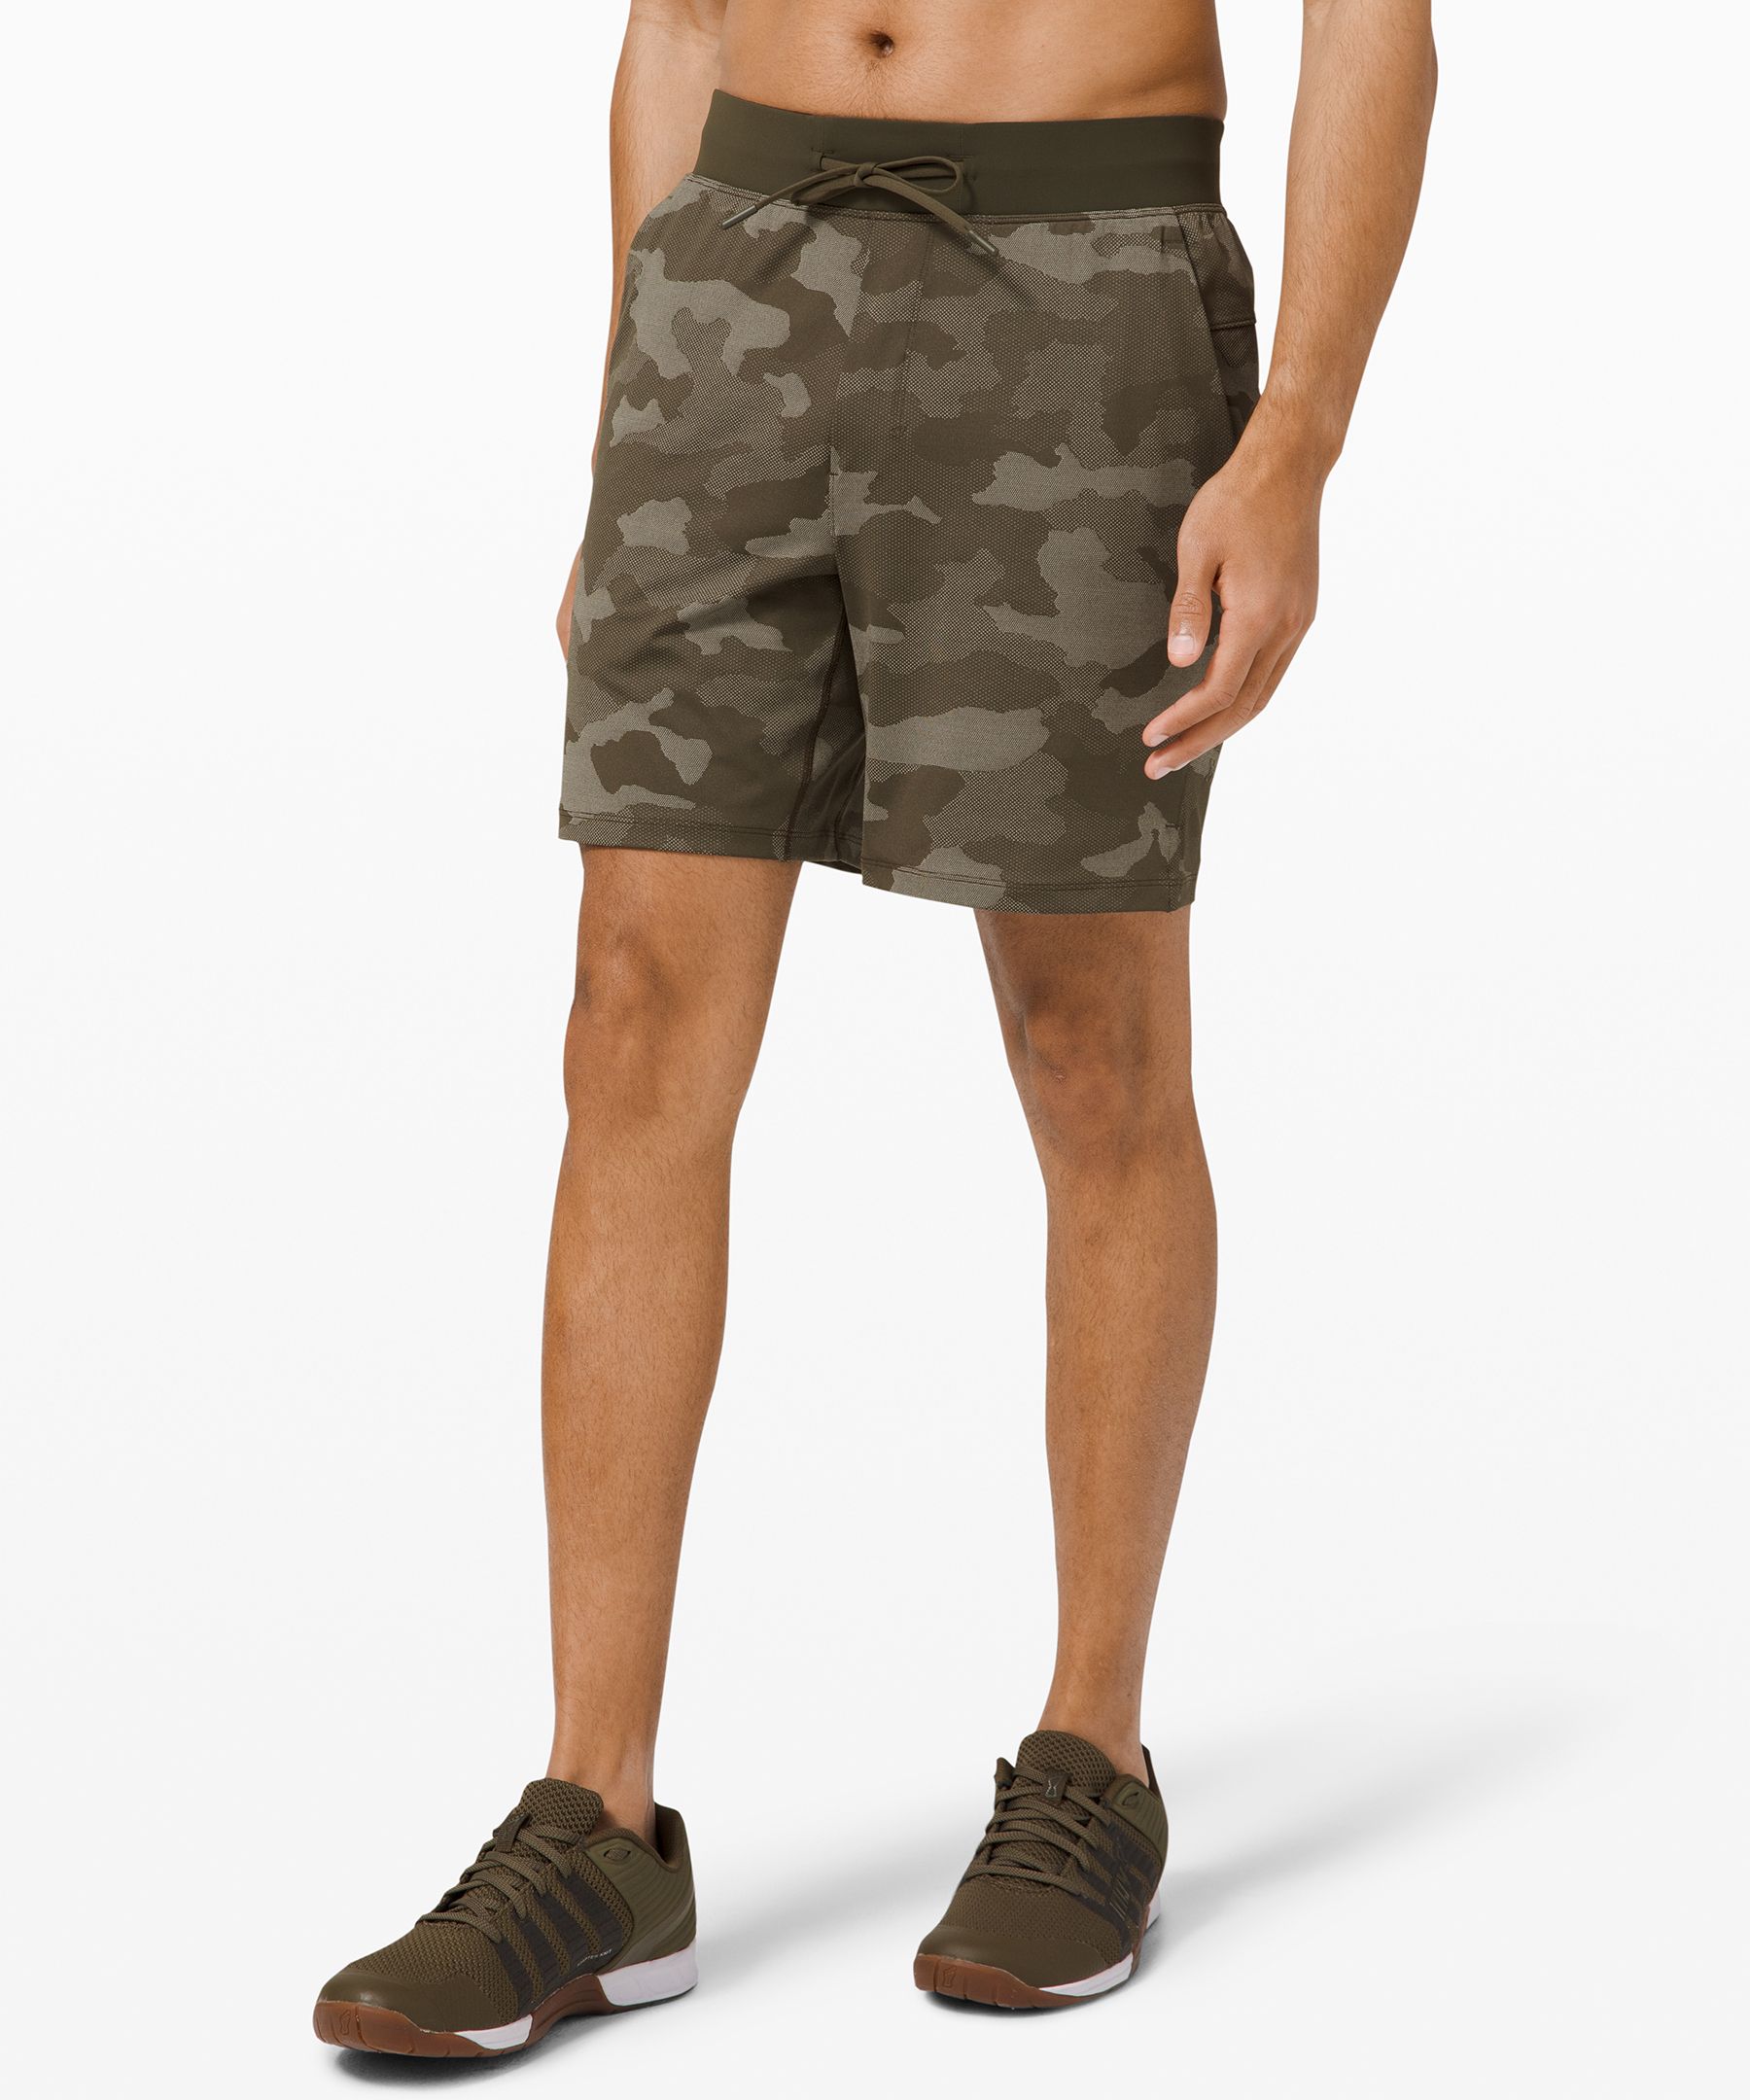 Lululemon T.h.e. Linerless Shorts 7" In Variegated Mesh Camo Max Dark Olive